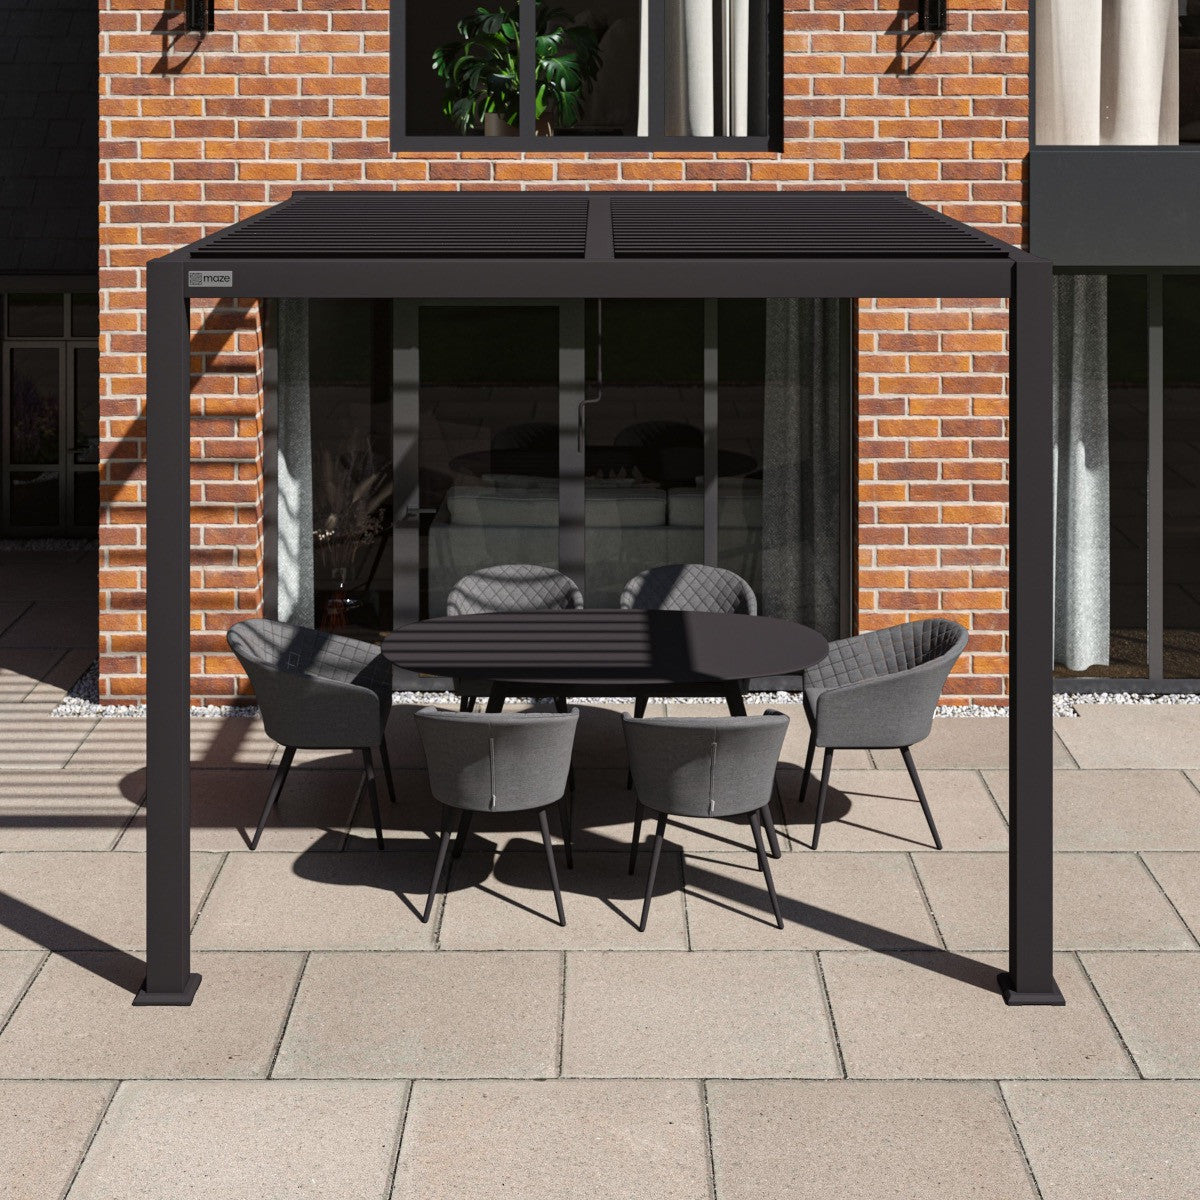 Maze Como Pergola Aluminium Lean-to Wall 30x30 Frame Only From Side-Better Bed Company